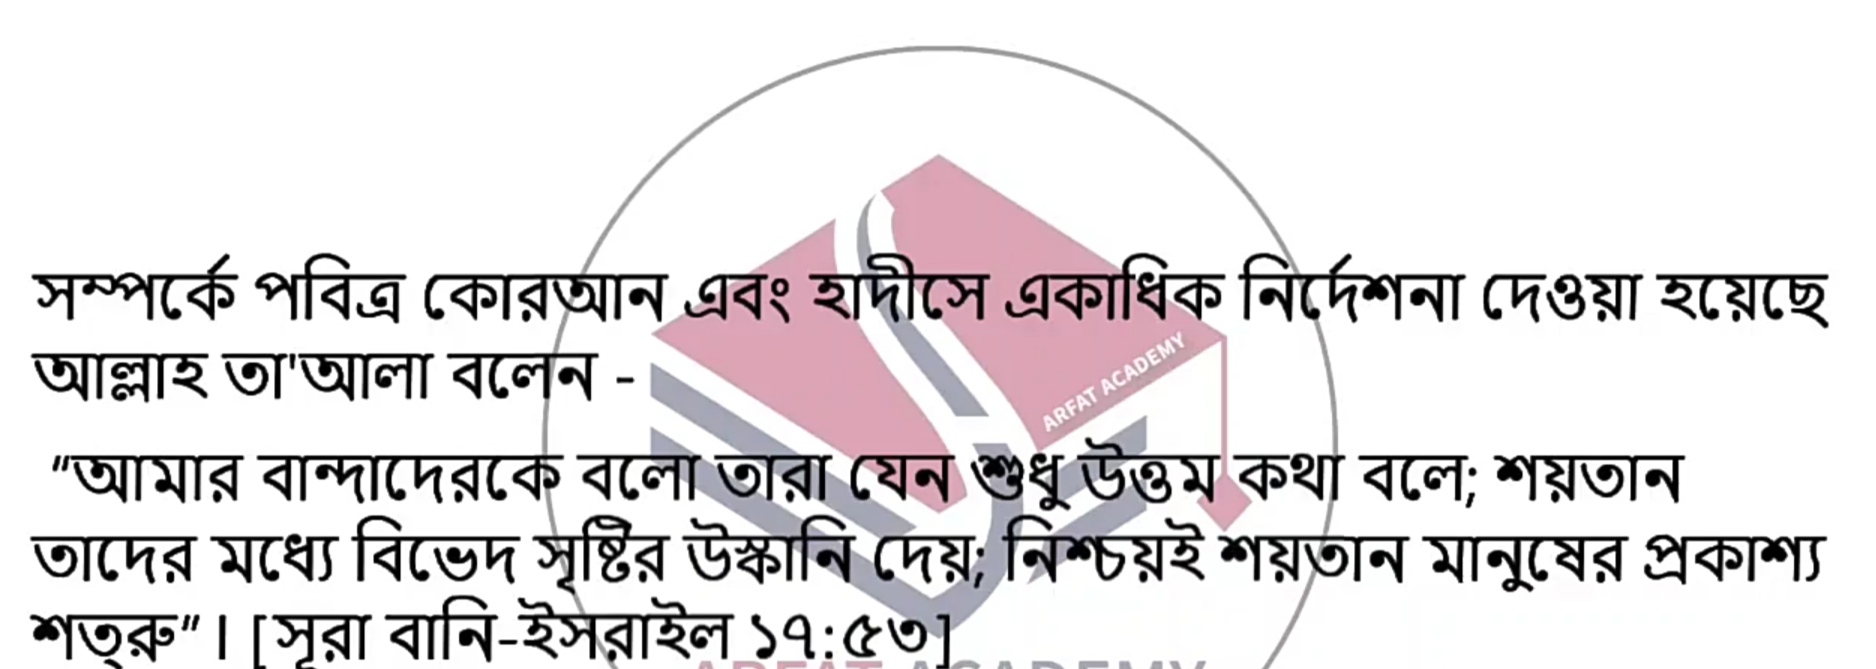 Class 7 Islam & Moral Education 19th Week Assignment 2021 Answer PDF Download 3